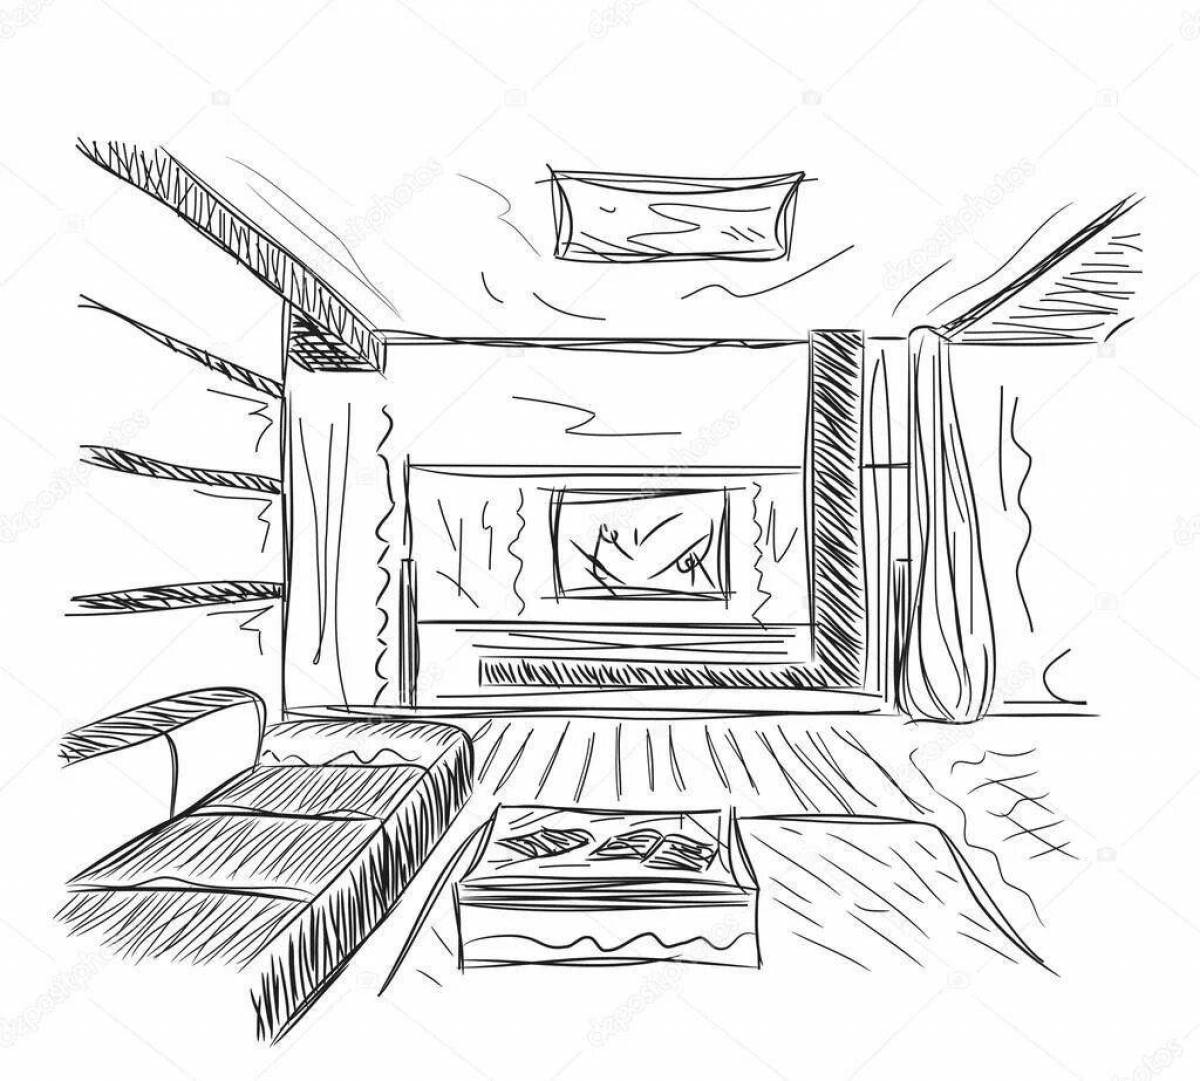 Charming hut inside coloring page